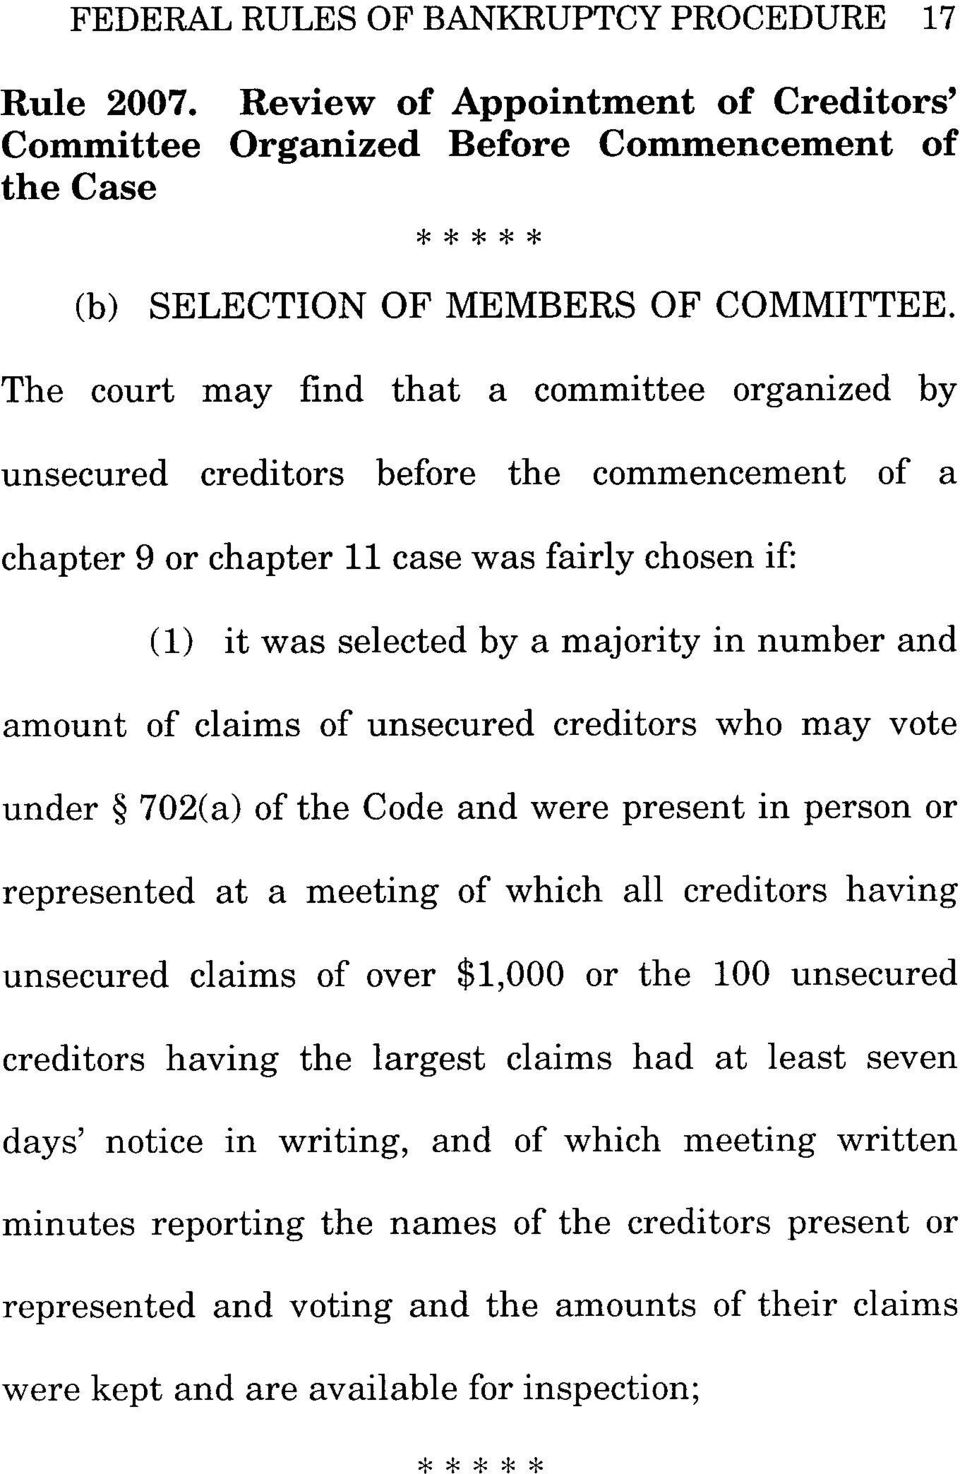 amount of claims of unsecured creditors who may vote under 702(a) of the Code and were present in person or represented at a meeting of which all creditors having unsecured claims of over $1,000 or